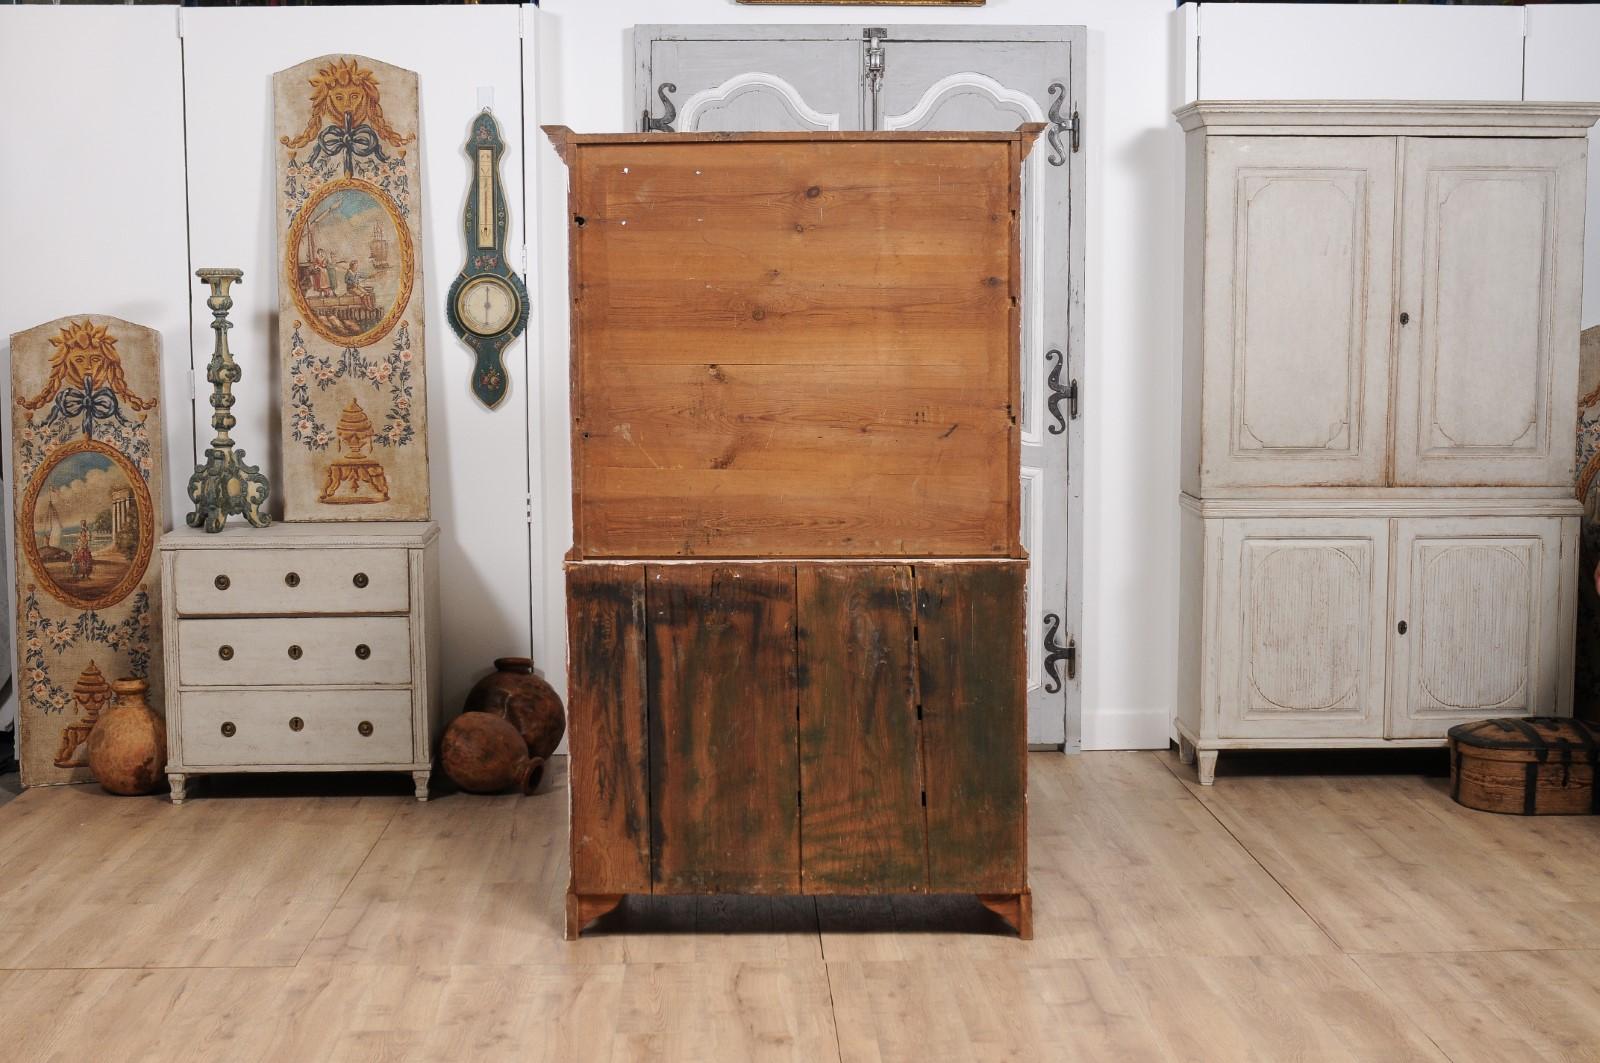 1834 Swedish Two-part Painted Cabinet with Doors and Graduated Drawers For Sale 3